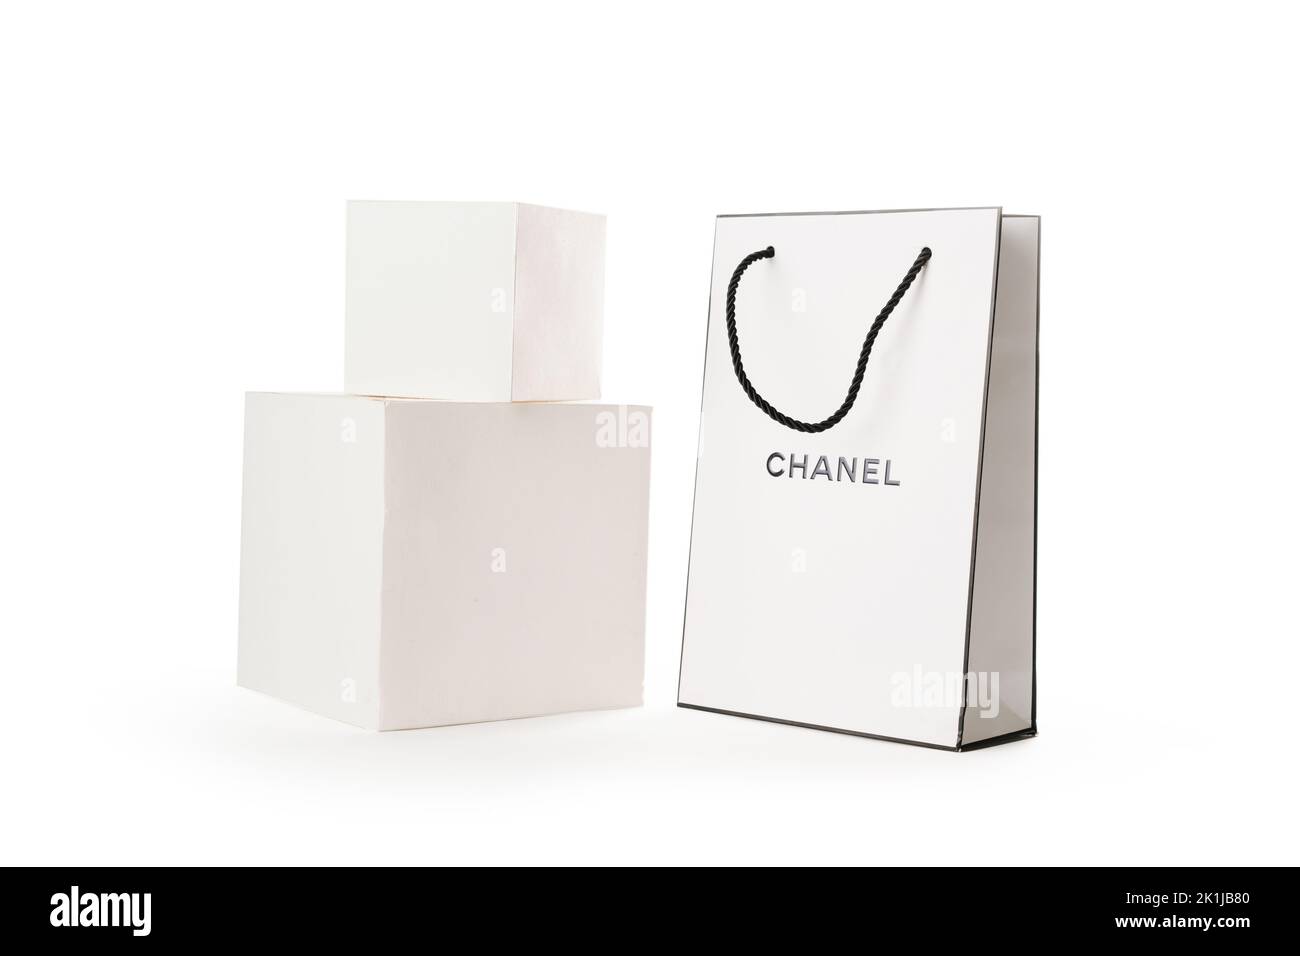 Cyprus, Paphos - SEPTEMBER 08, 2022: Composition of branded paper bag of Chanel perfume shop next to white cubes. Over white background. Stock Photo